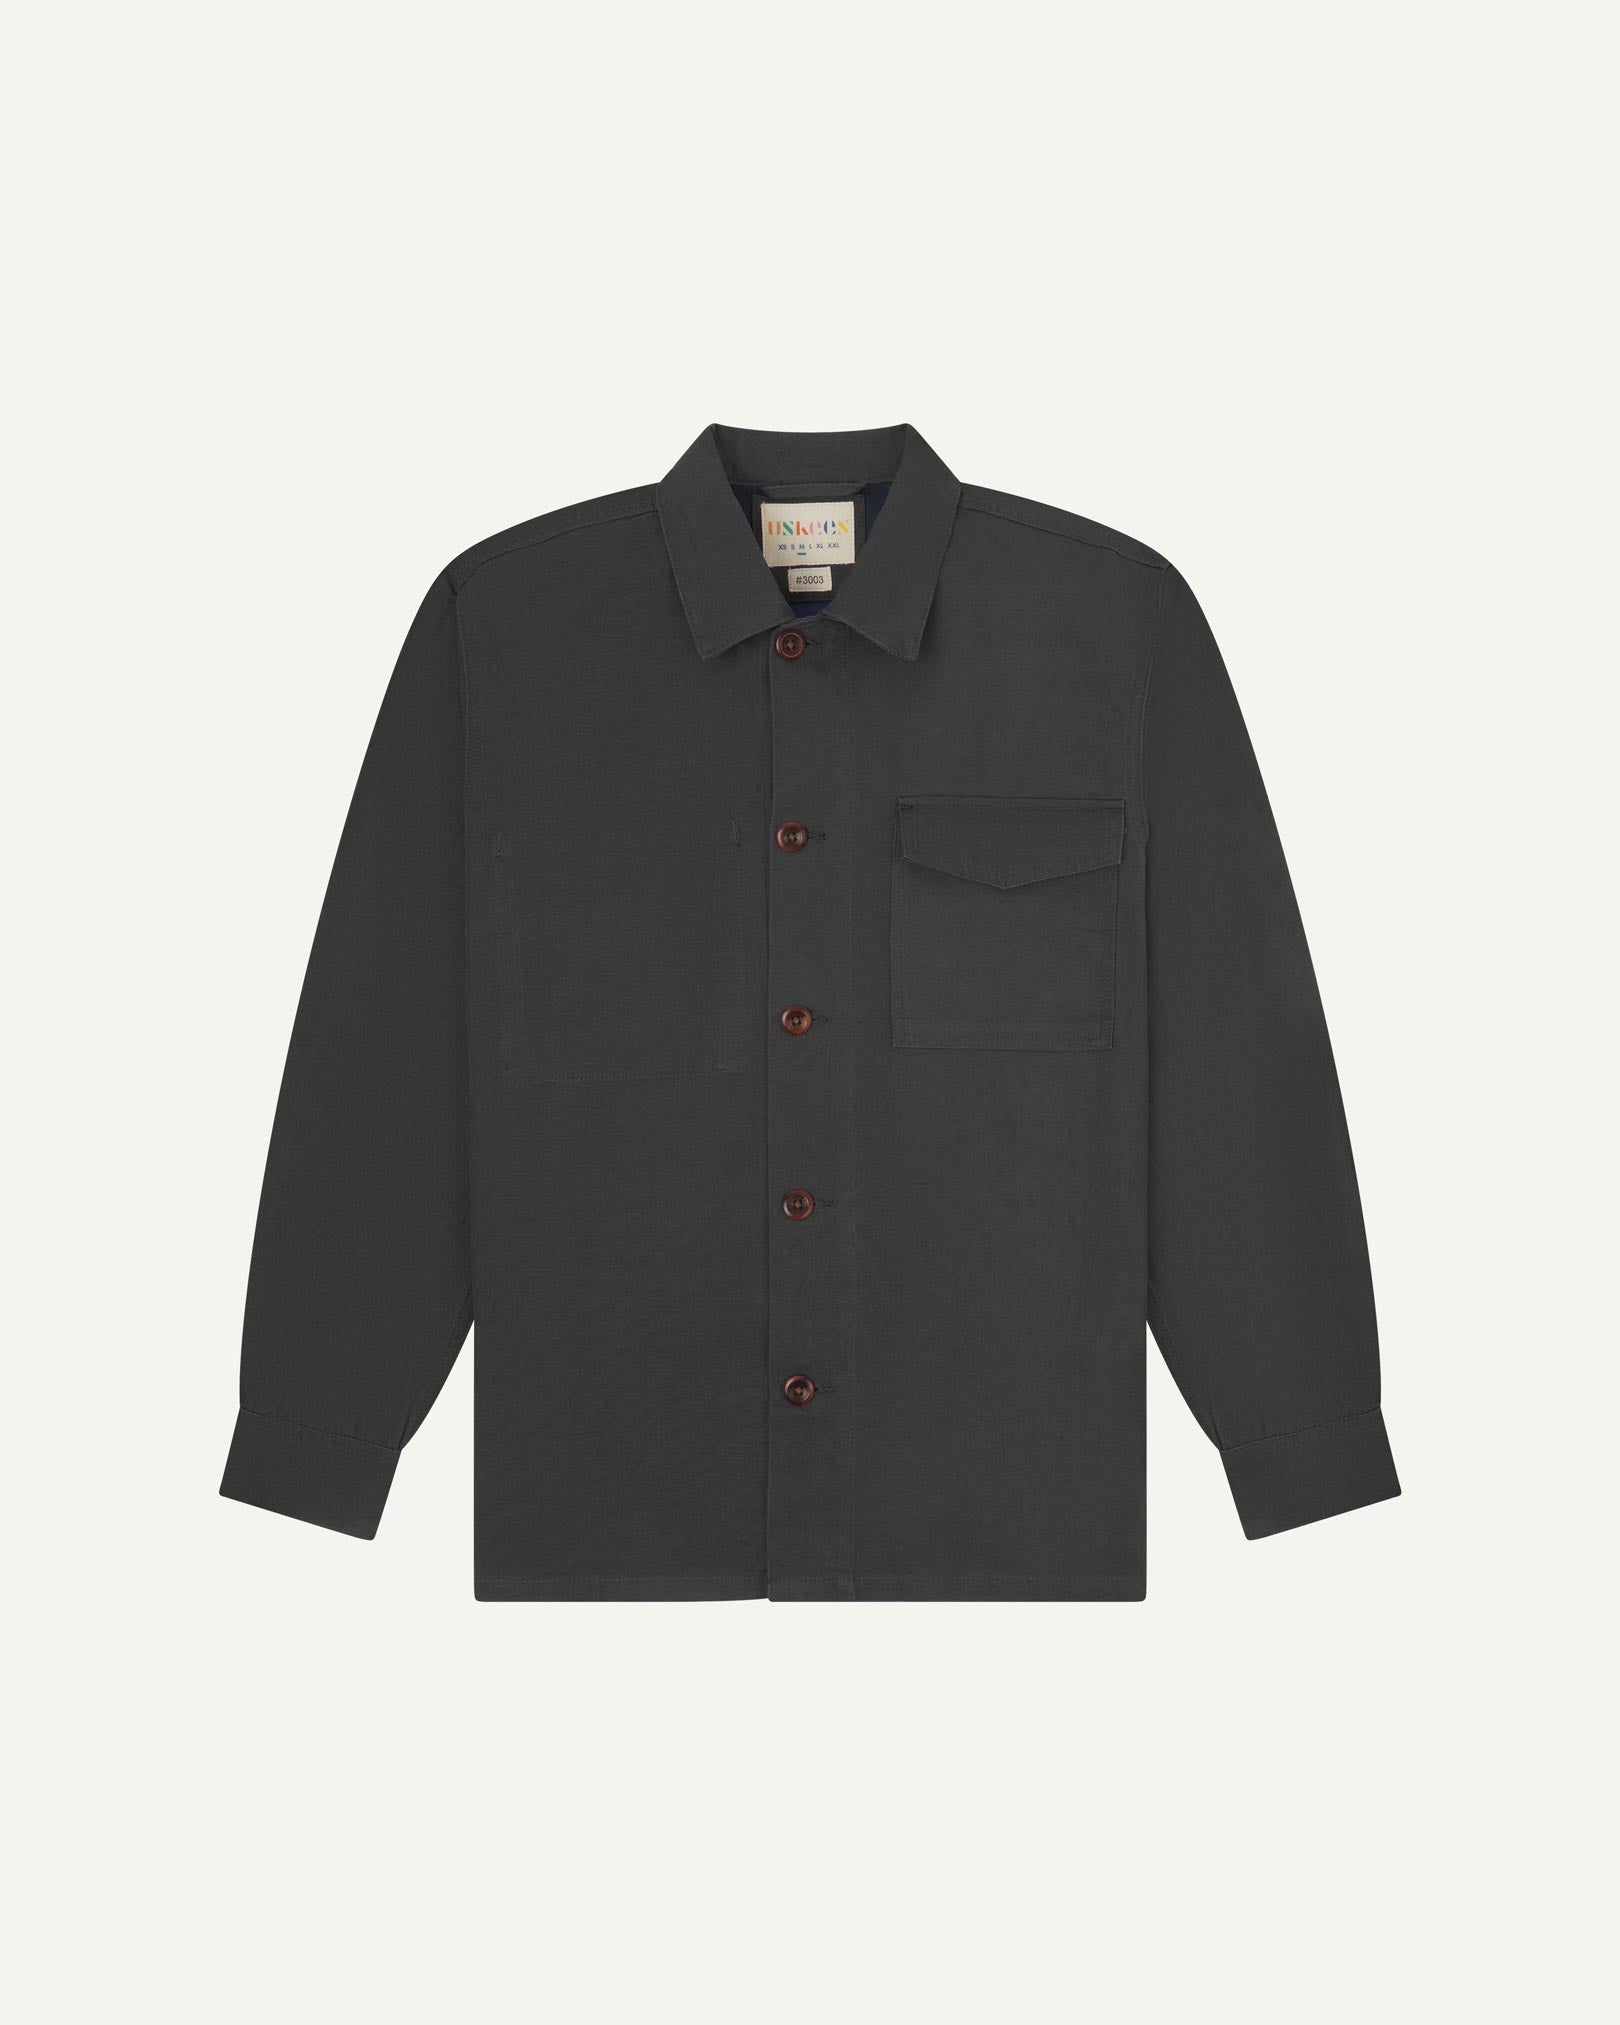 Charcoal buttoned organic cotton overshirt from Uskees with clear view of chest pocket and Uskees branding label.